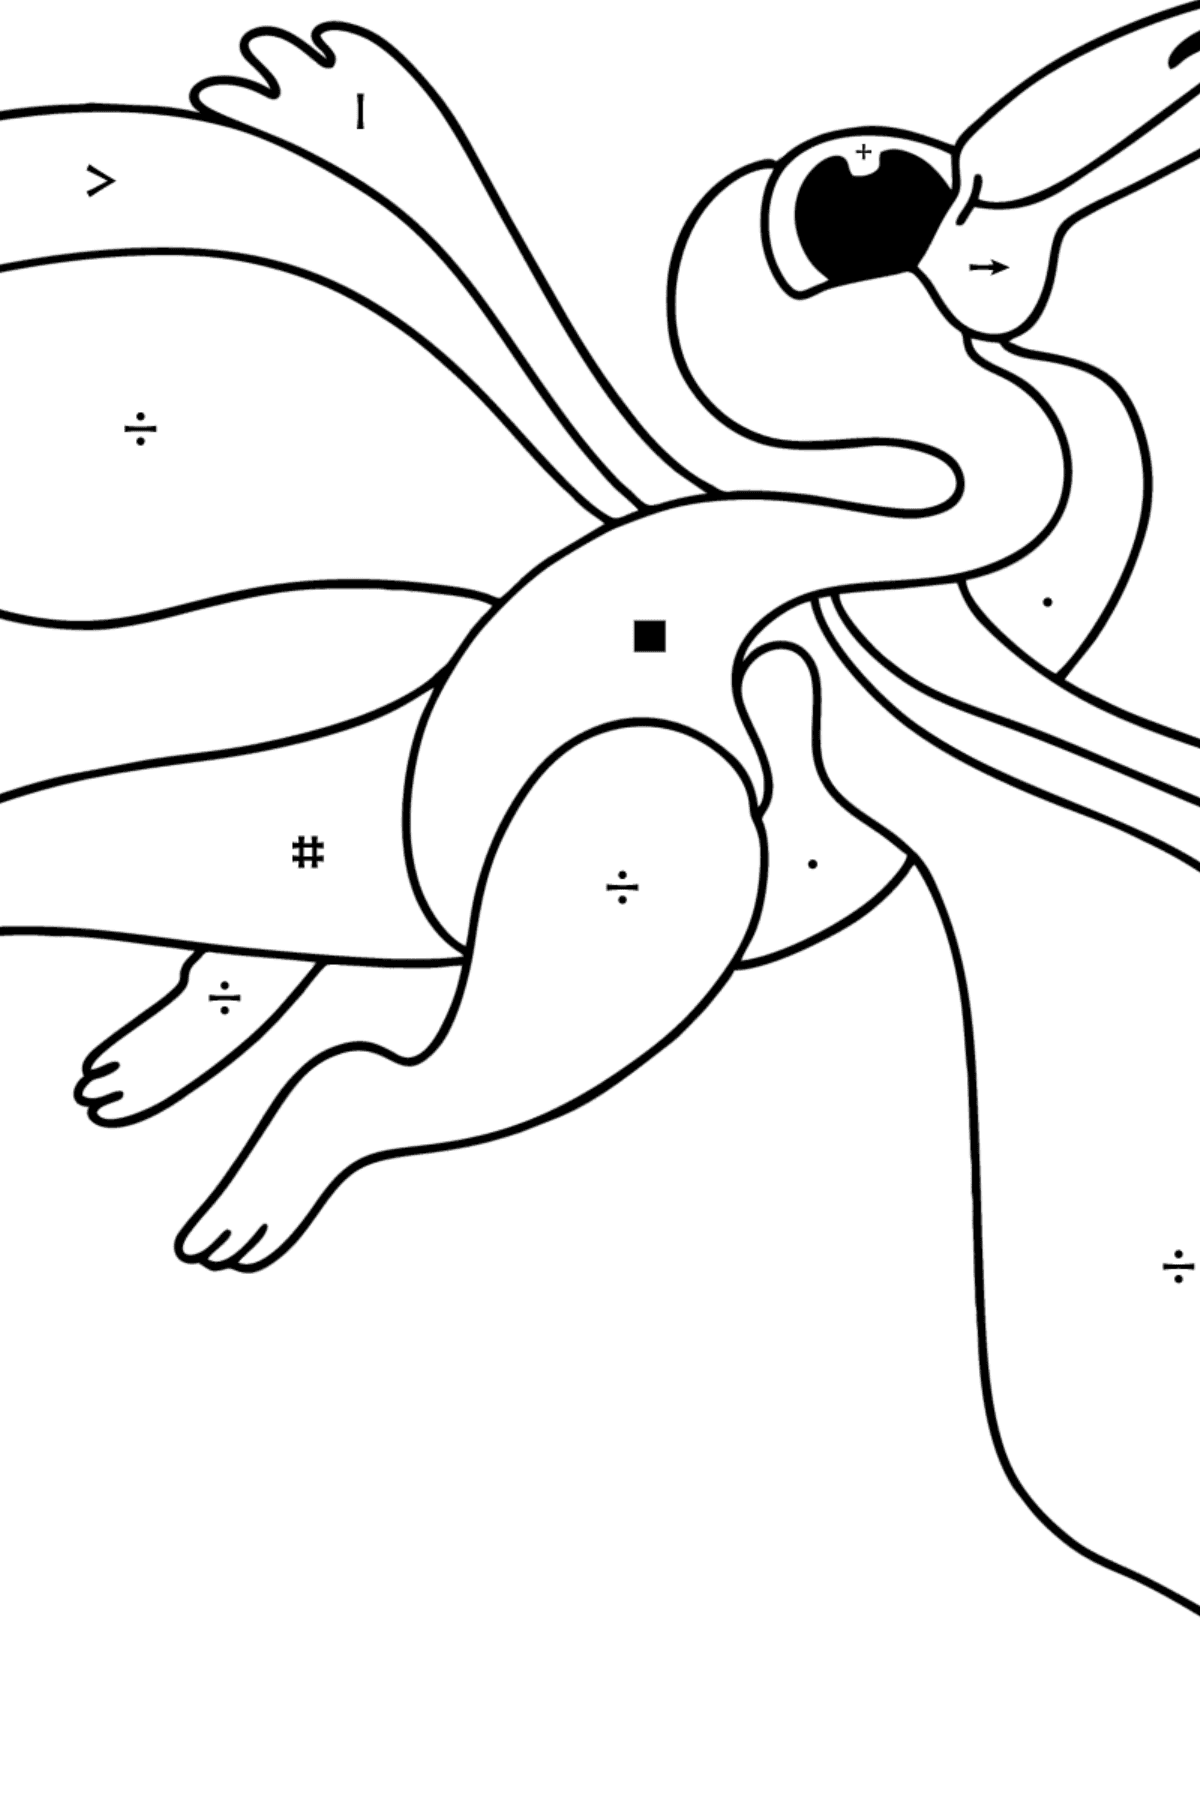 Pterodactyl coloring page - Coloring by Symbols for Kids